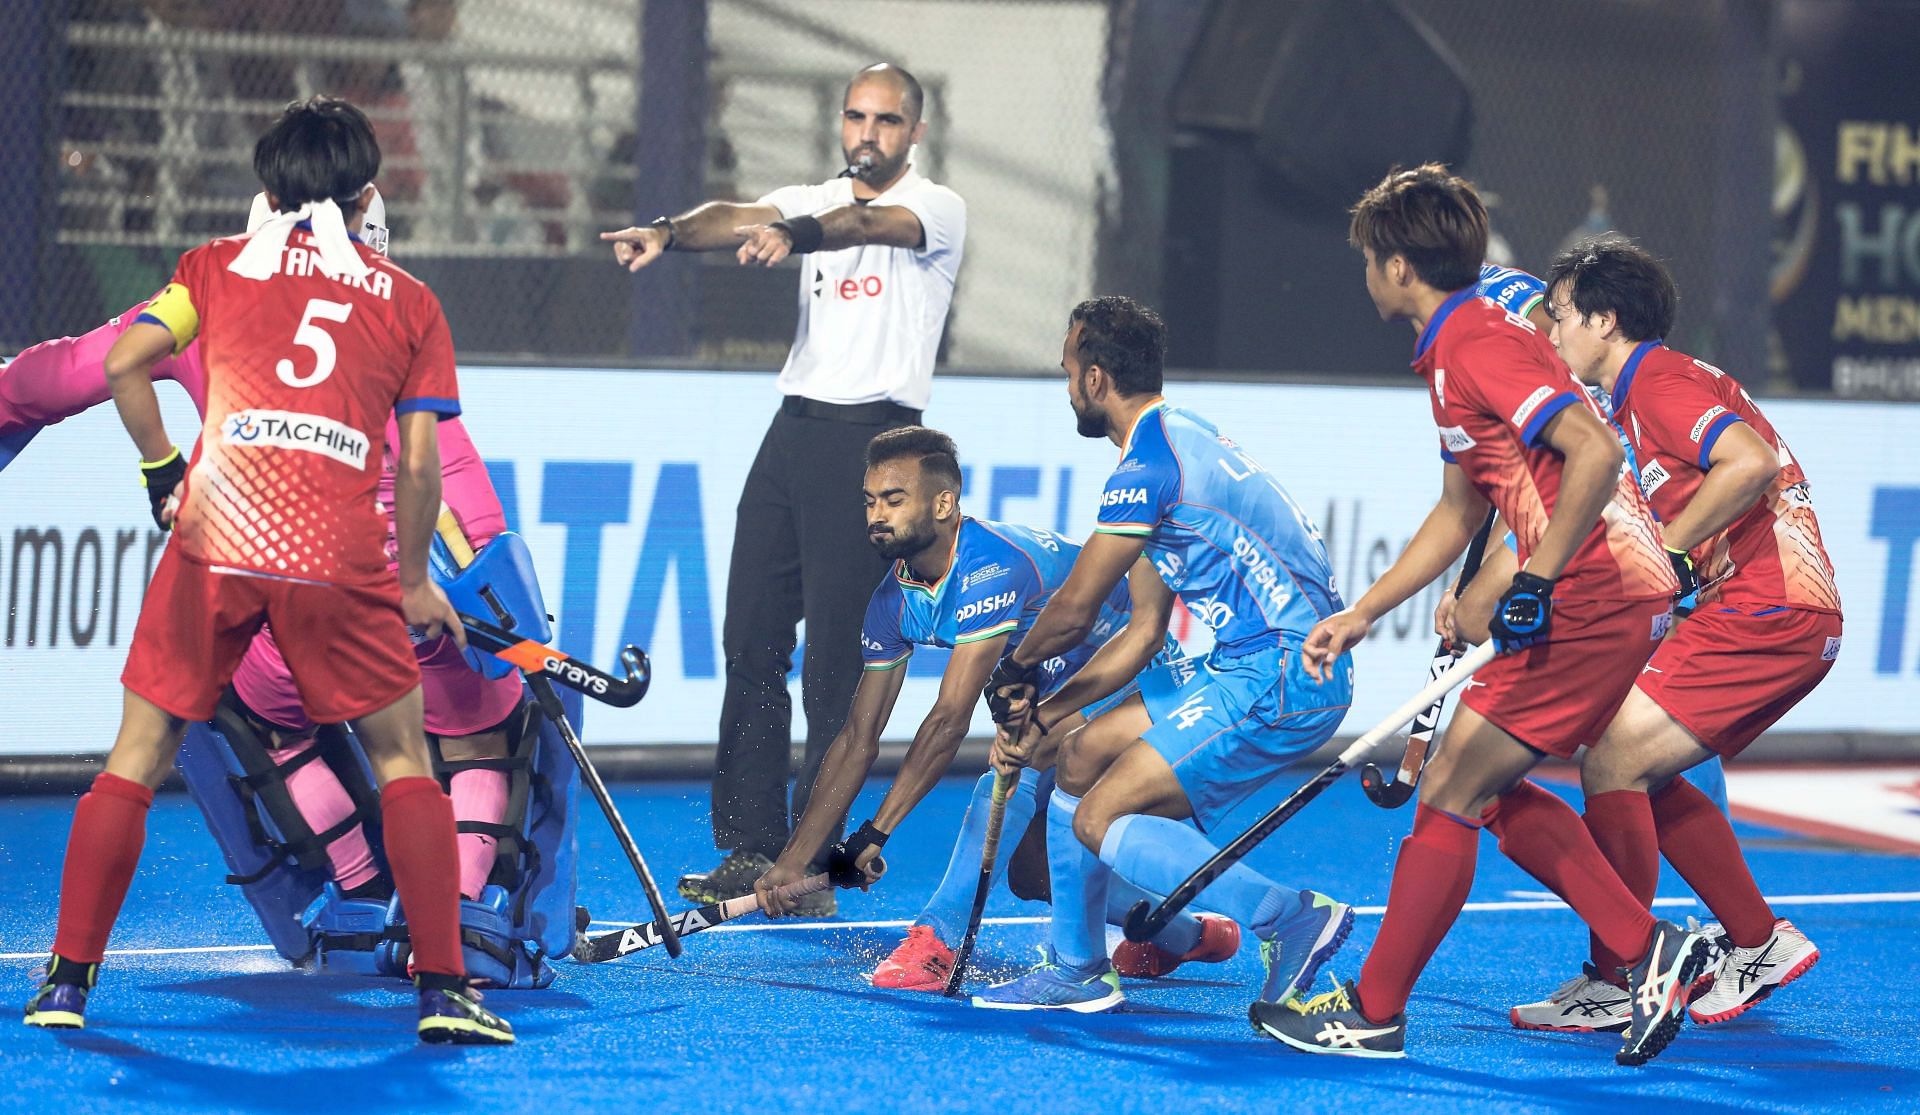 India pumped 8 goals past Japan in their Hockey World Cup classification game